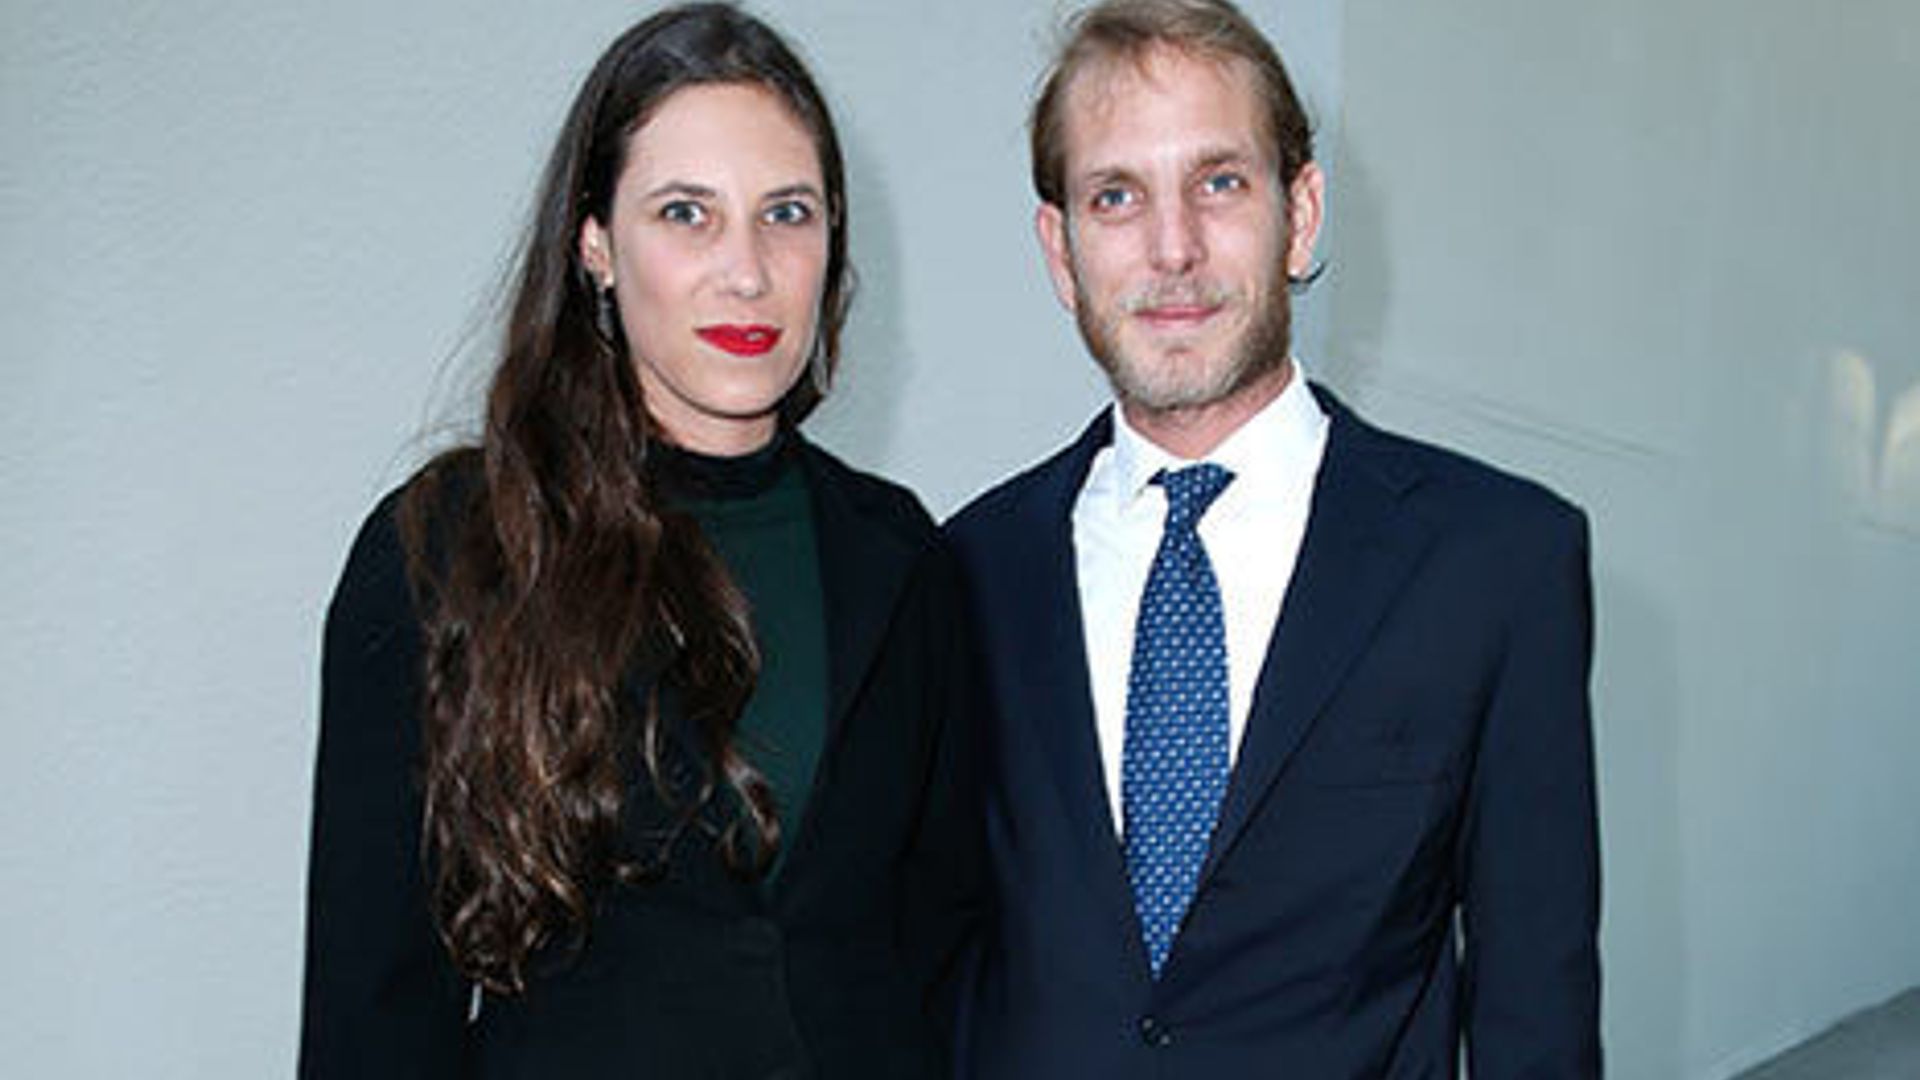 Princess Grace's grandson Andrea Casiraghi expecting second child